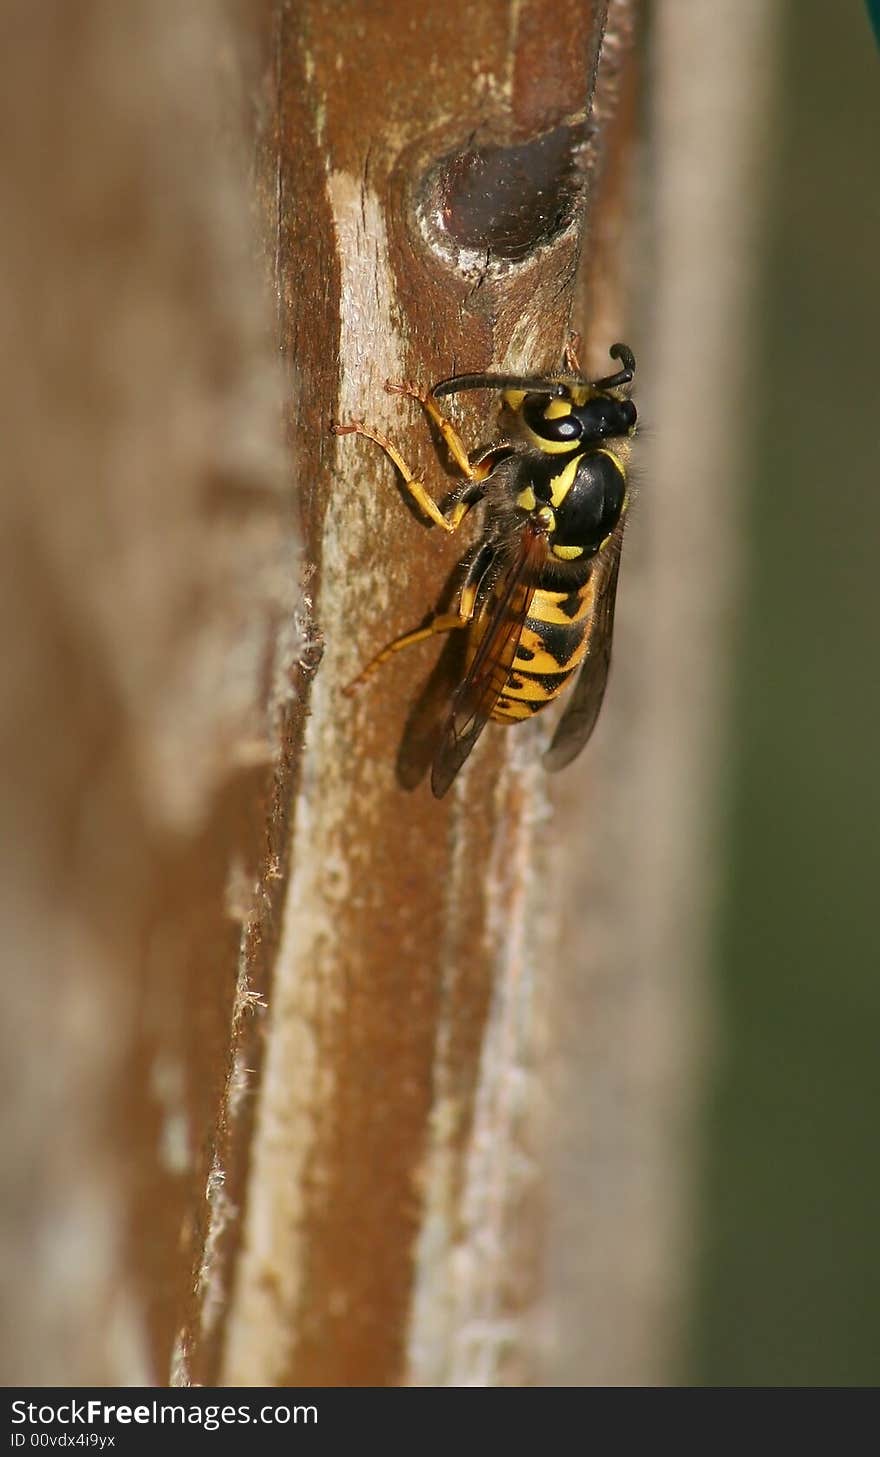 A wasp on a wooden wall